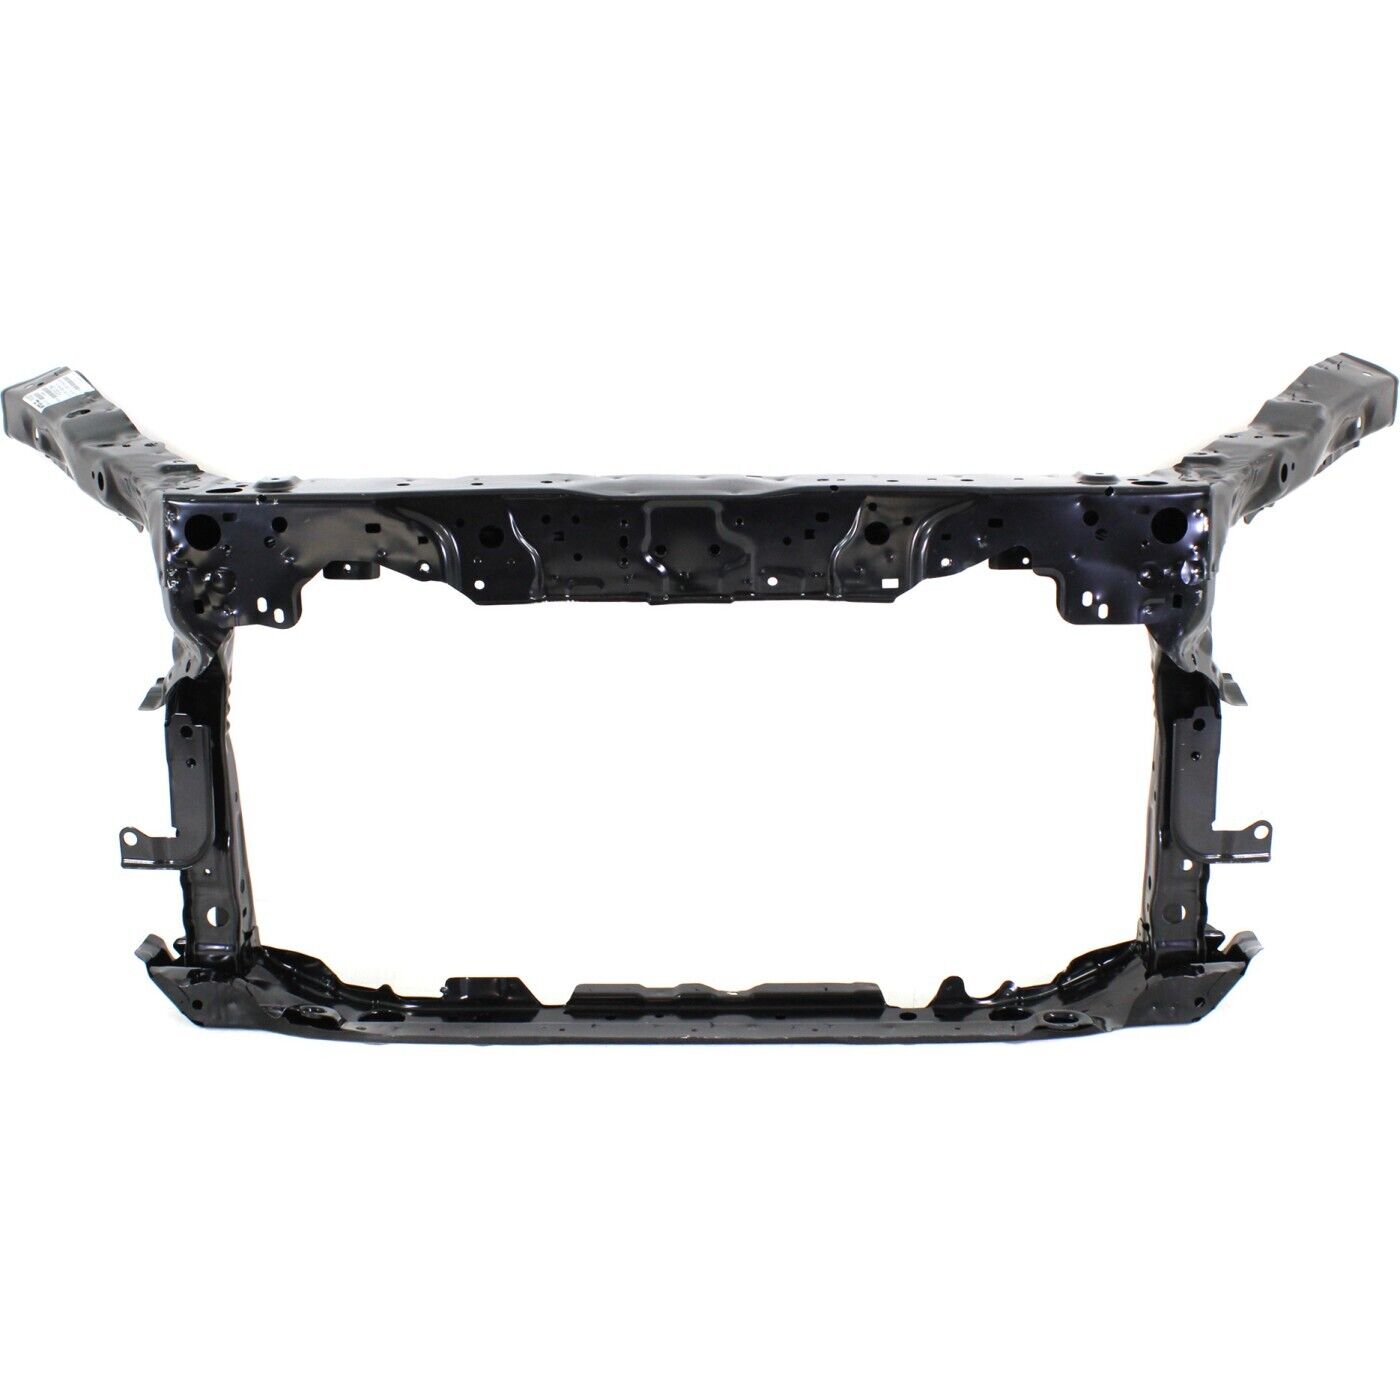 Radiator Support For 2013-2016 Honda Accord Assembly